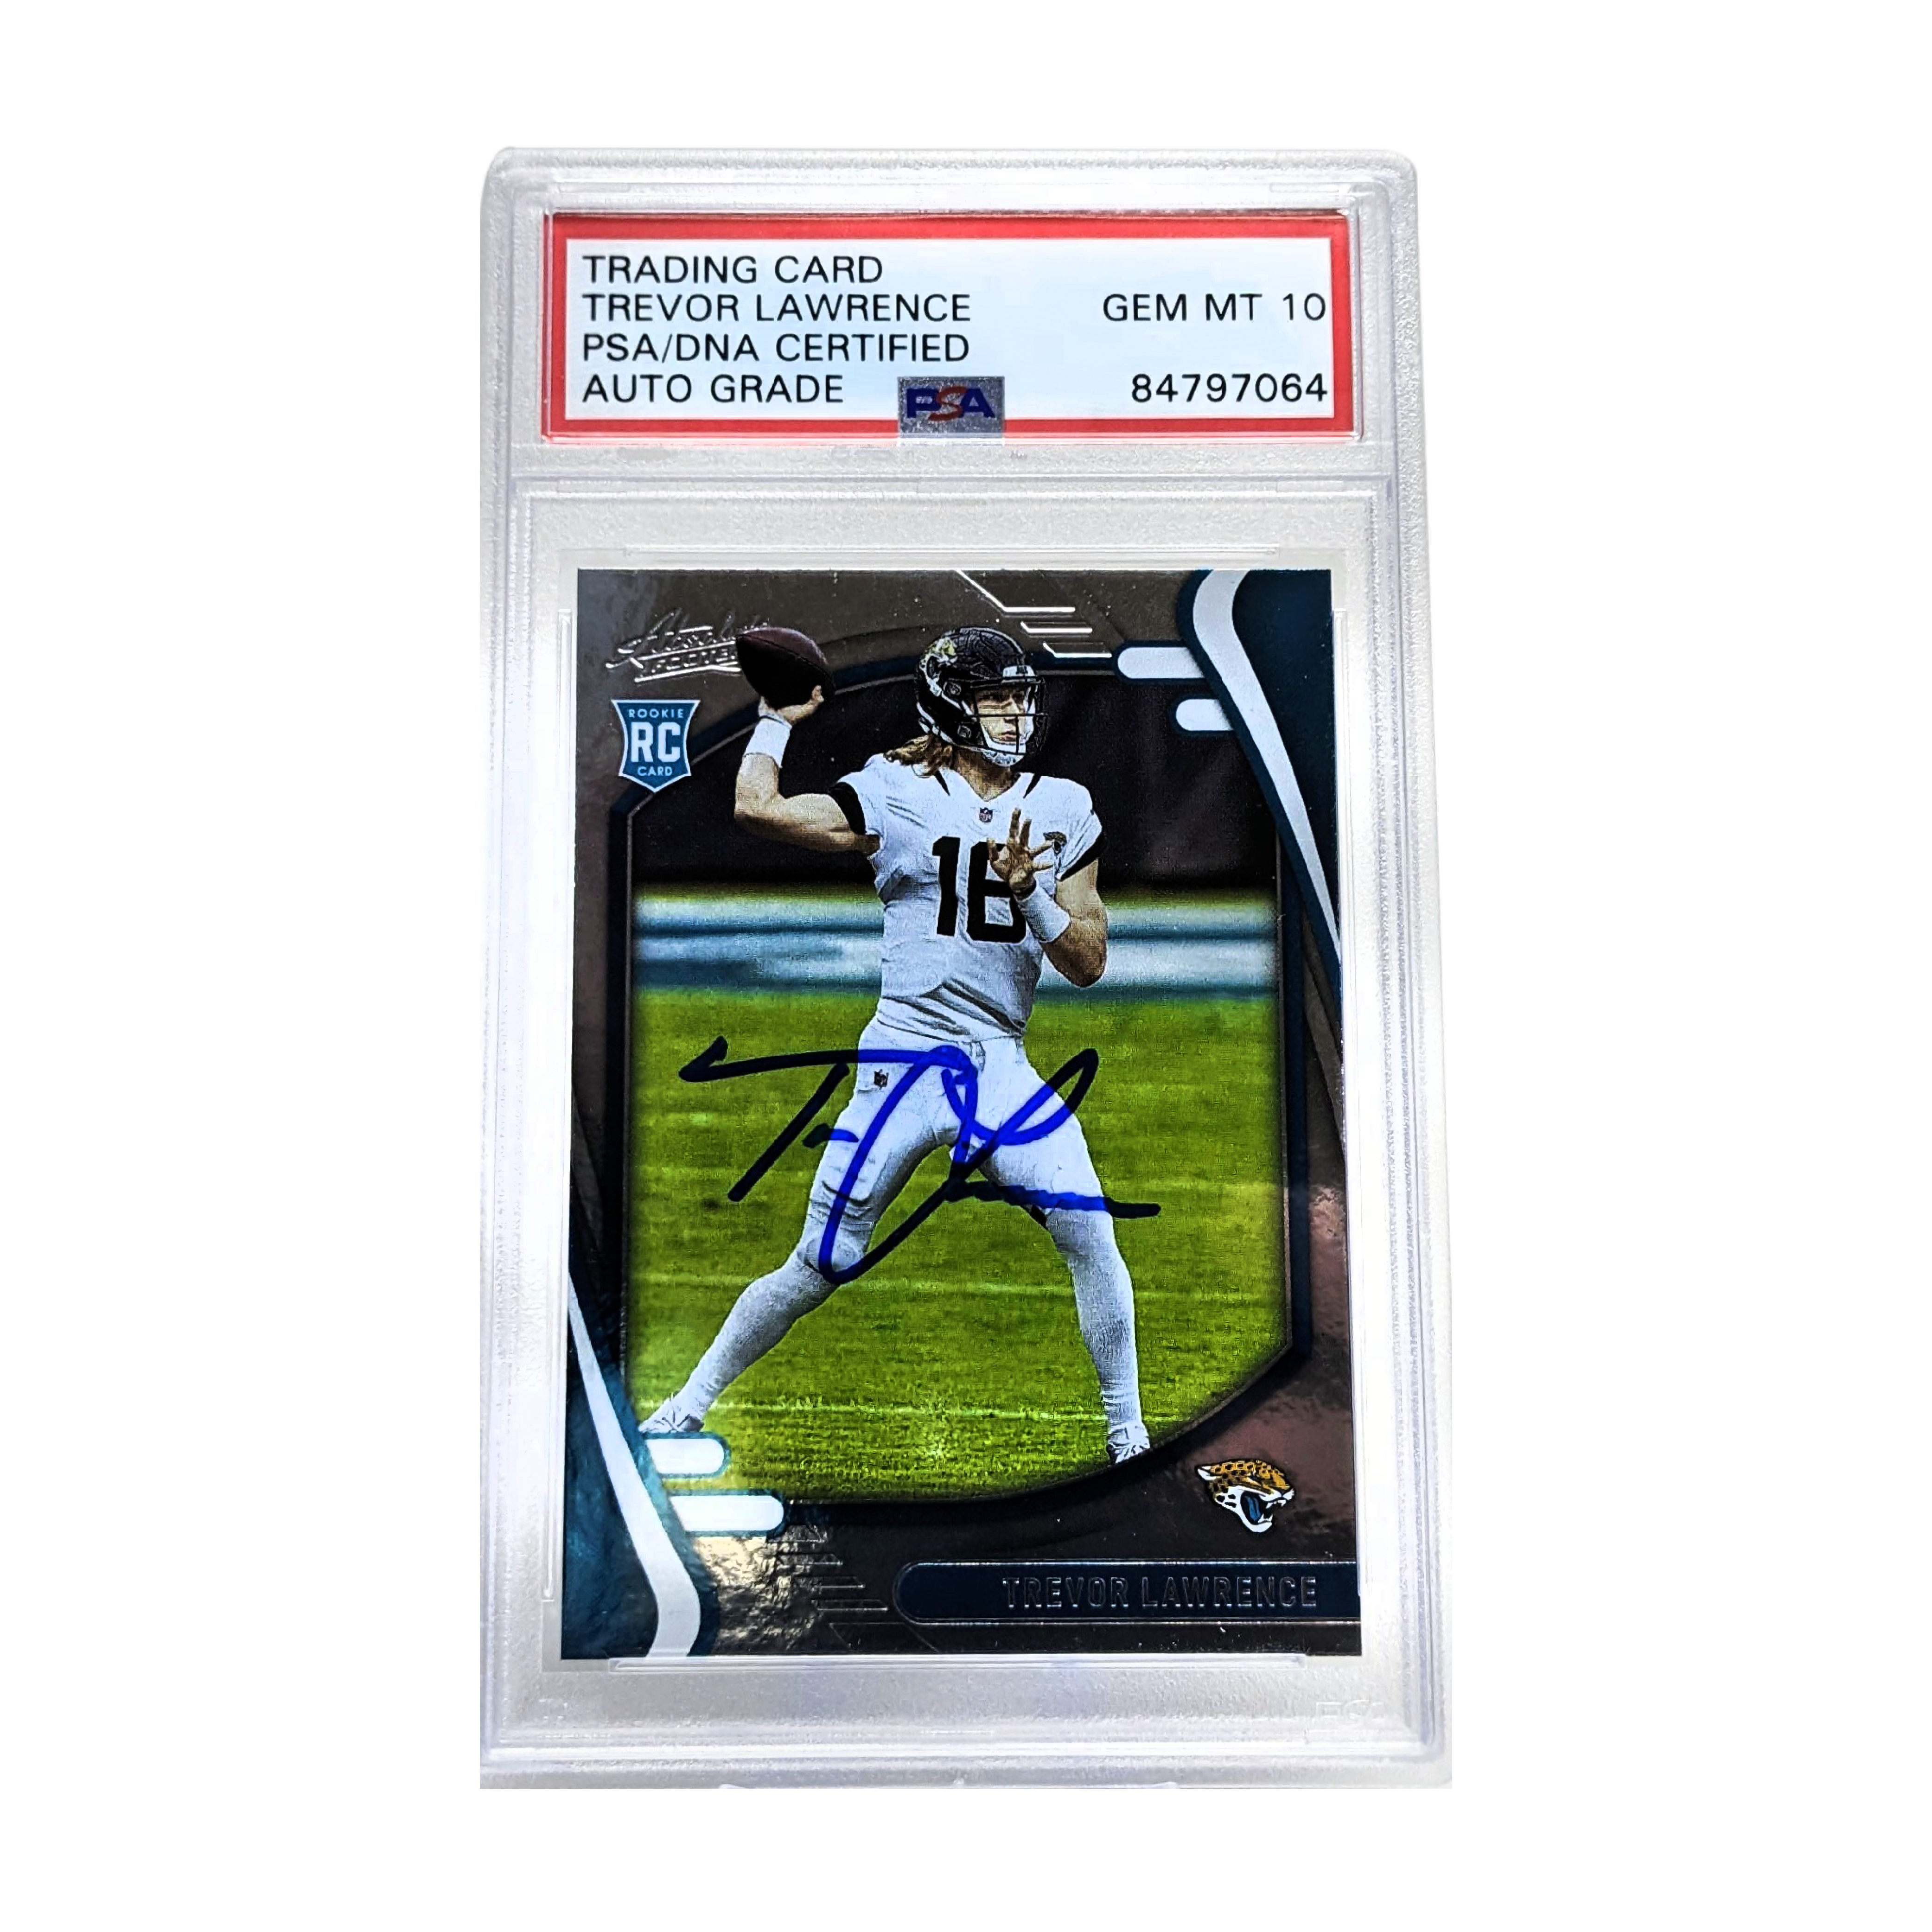 Trevor Lawrence 2021 Panini Absolute Autographed Card - PSA